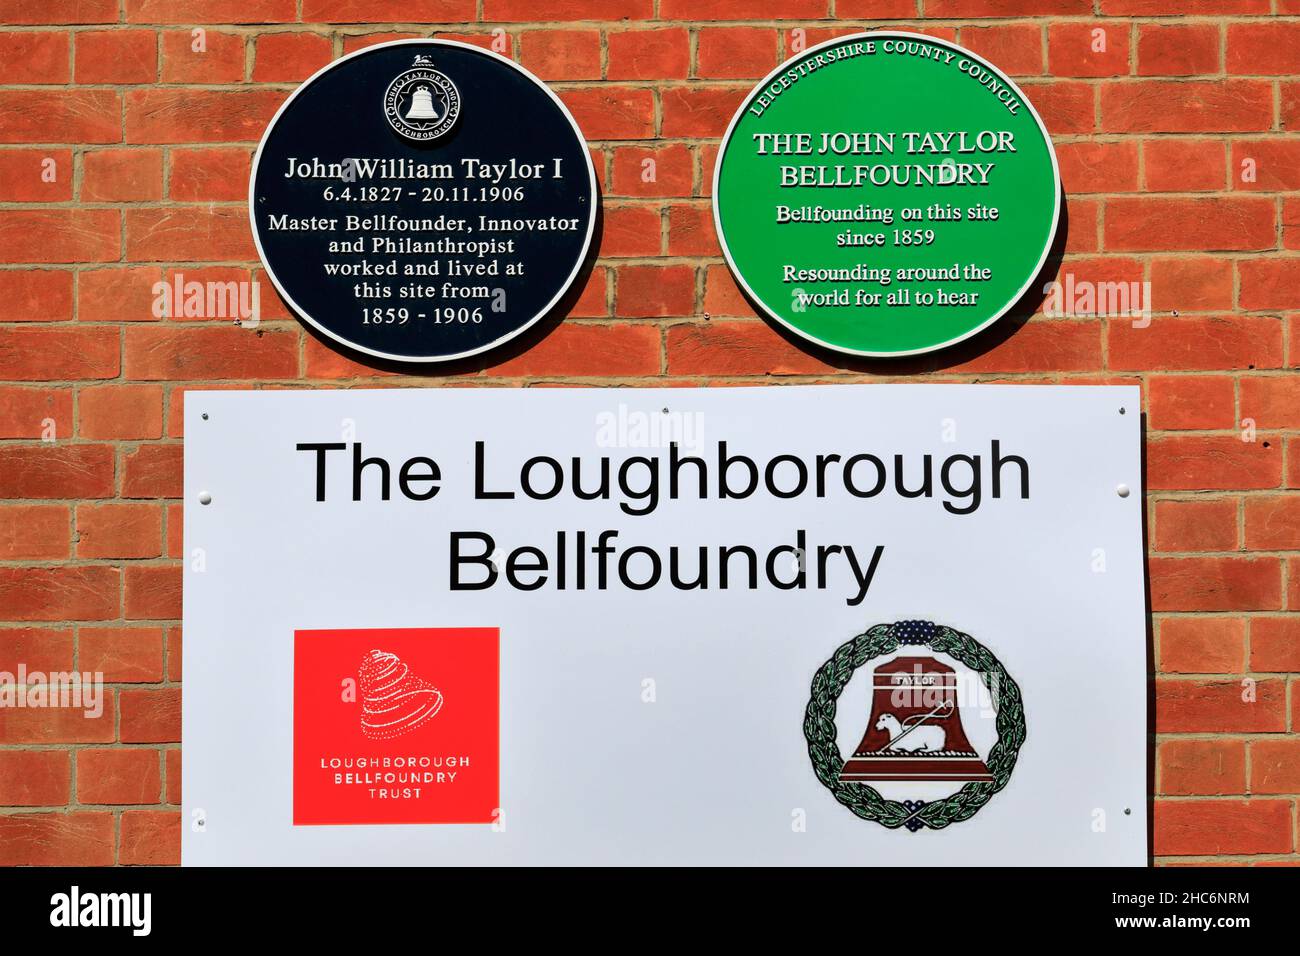 The John Taylor and Co bell foundry and museum, Loughborough market town, Leicestershire, England Stock Photo